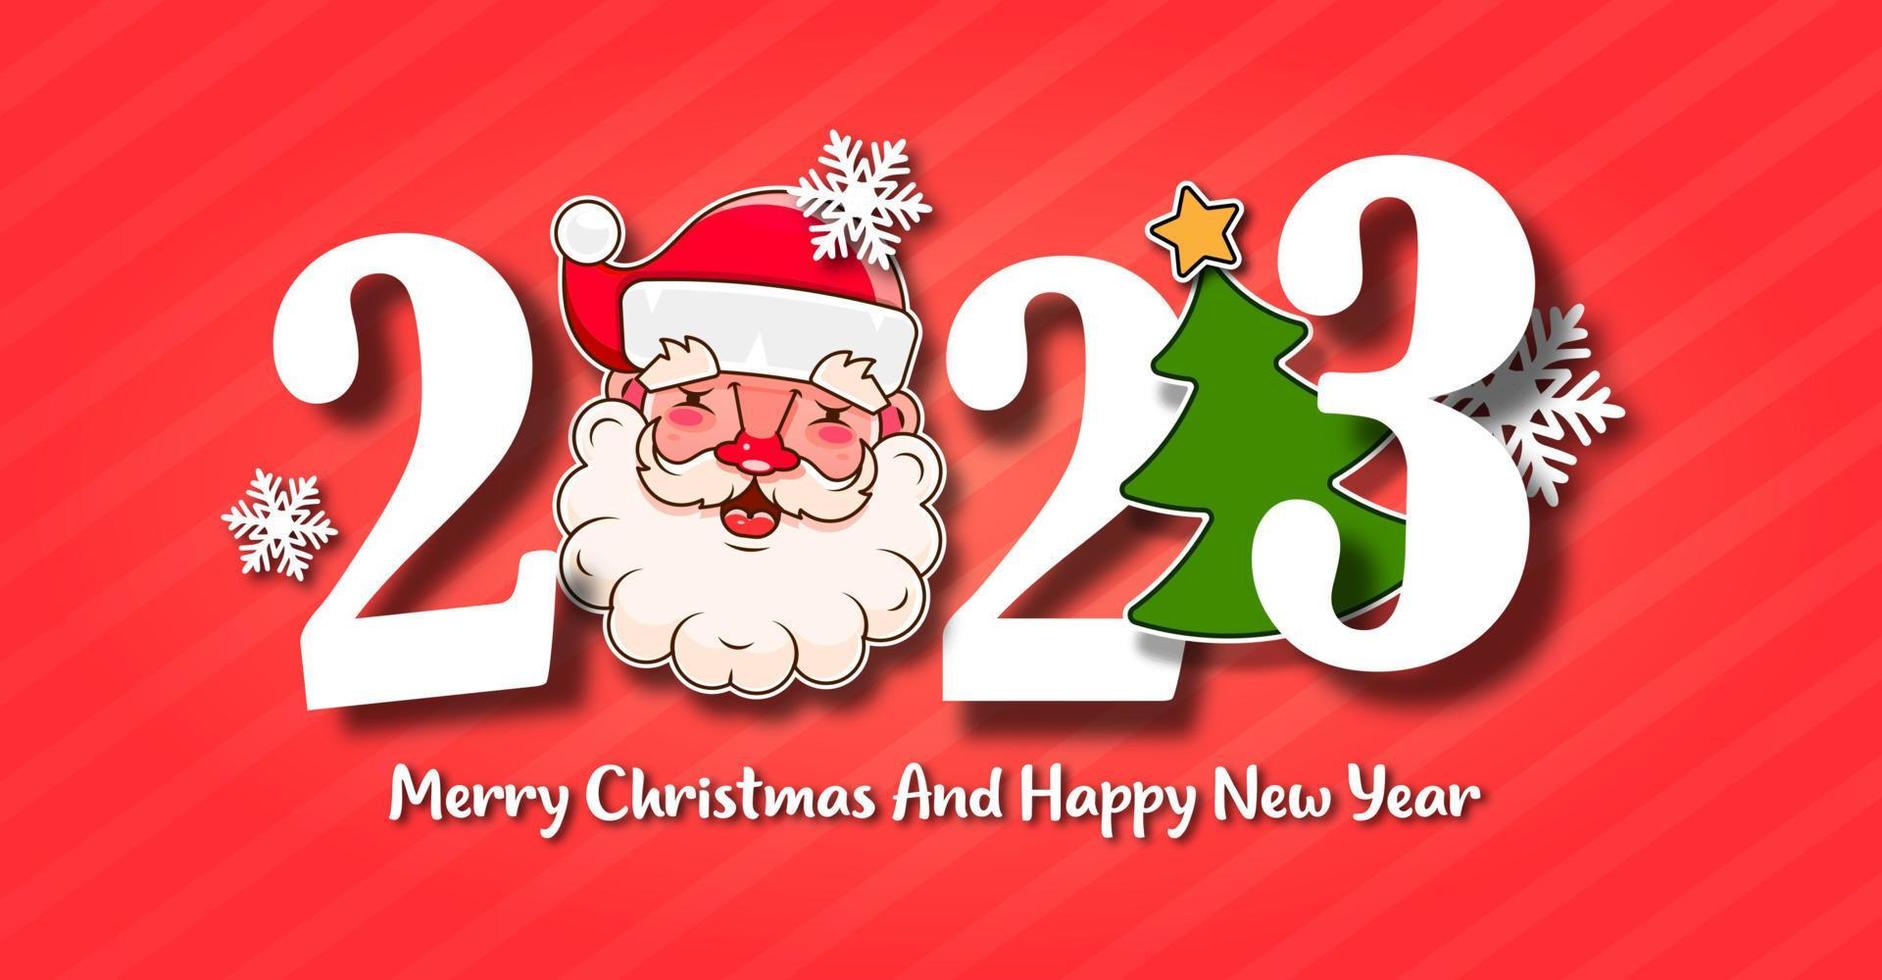 Merry Christmas and Happy New Year 2023 Wallpaper